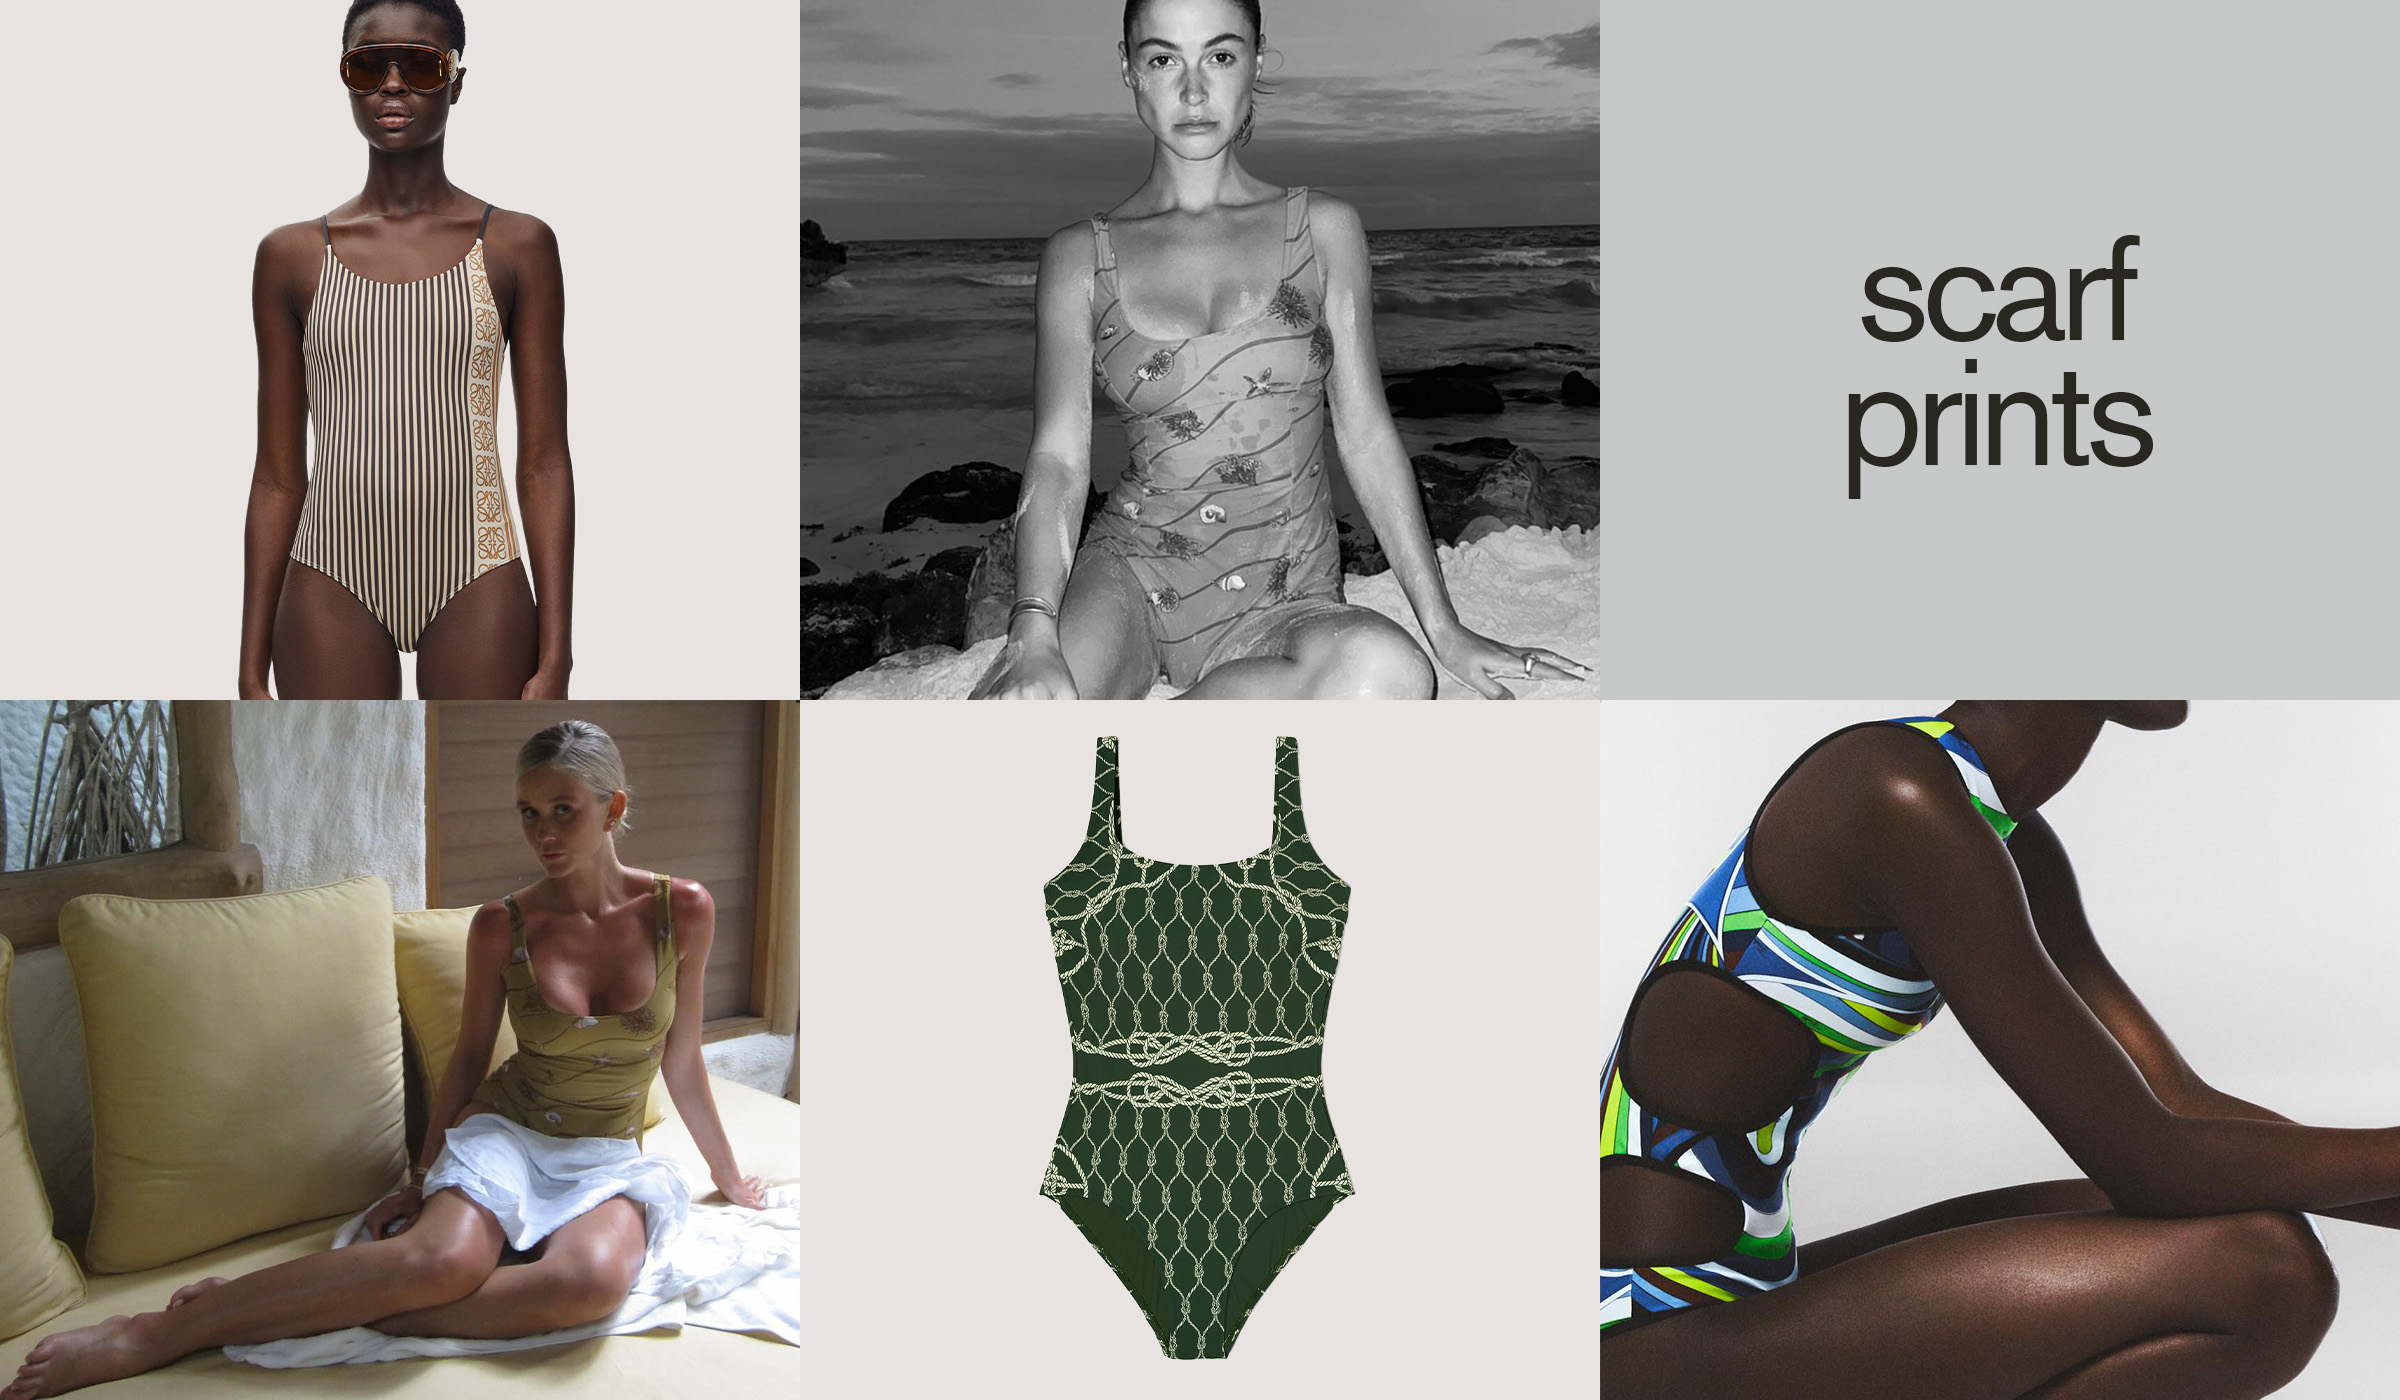 Collage of images showing scarf printed swimsuits.